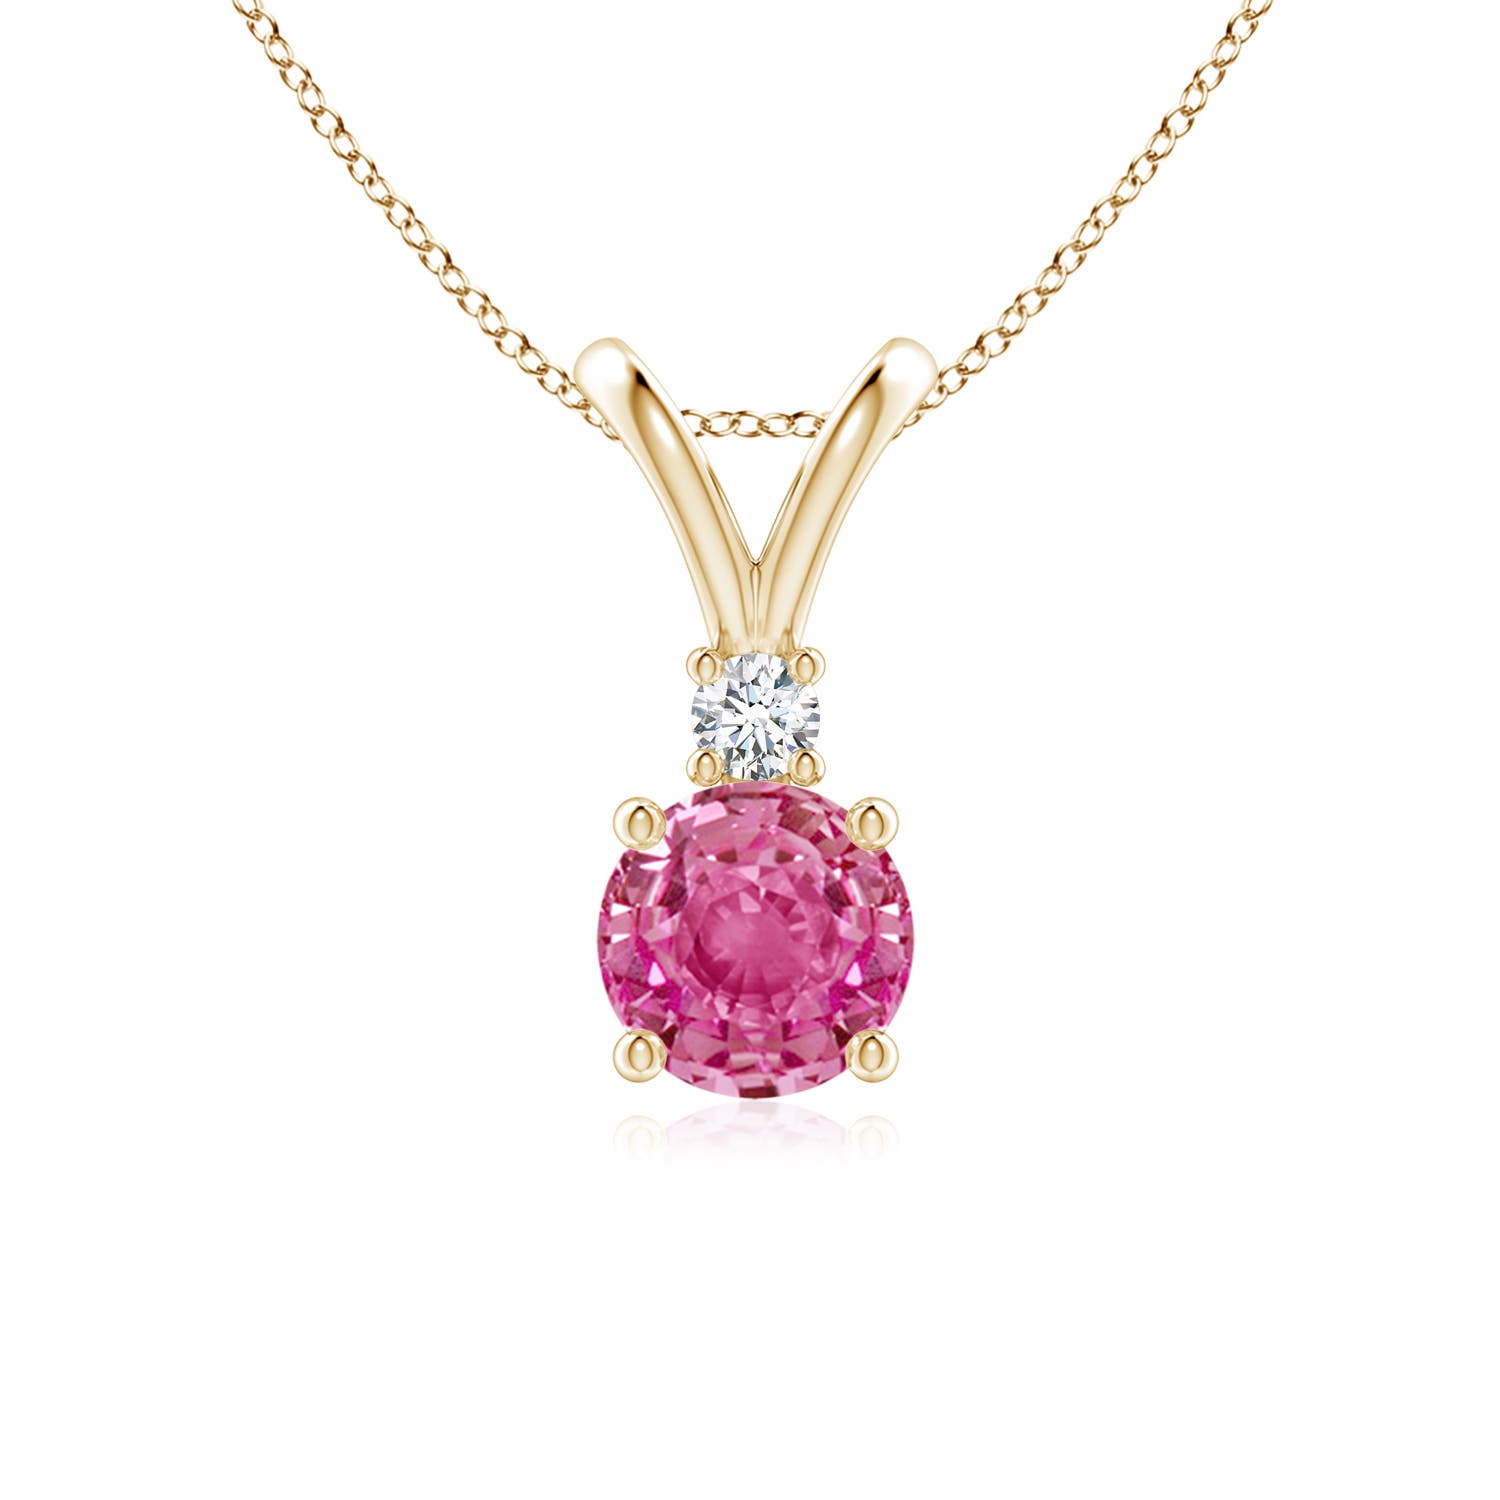 AAA - Pink Sapphire / 1.04 CT / 14 KT Yellow Gold